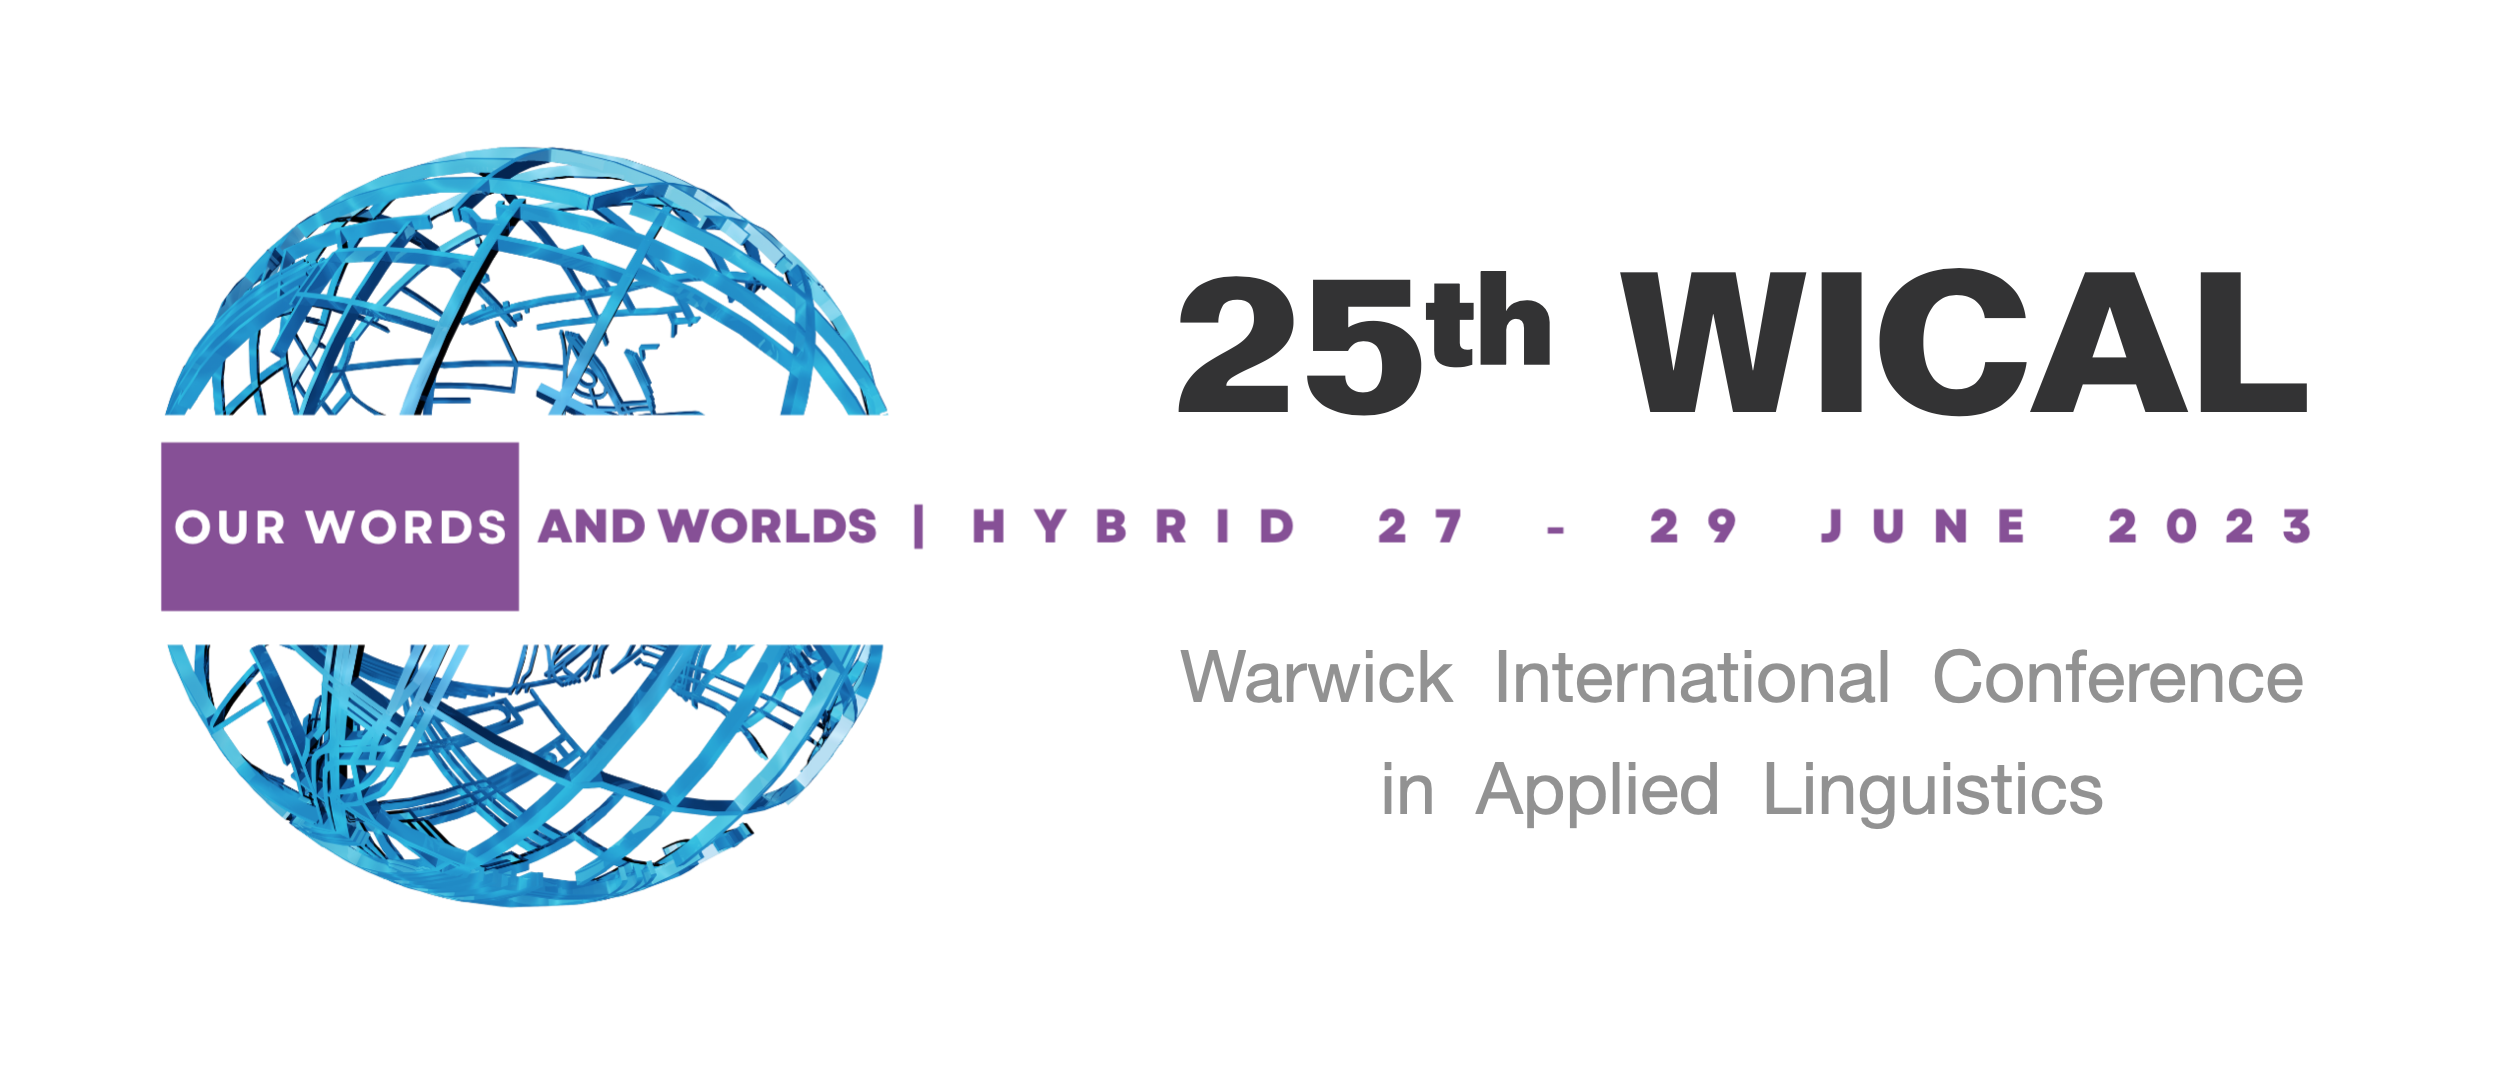 25th WICAL logo. 27-29th June. Warwick International Conference on Applied Linguistics